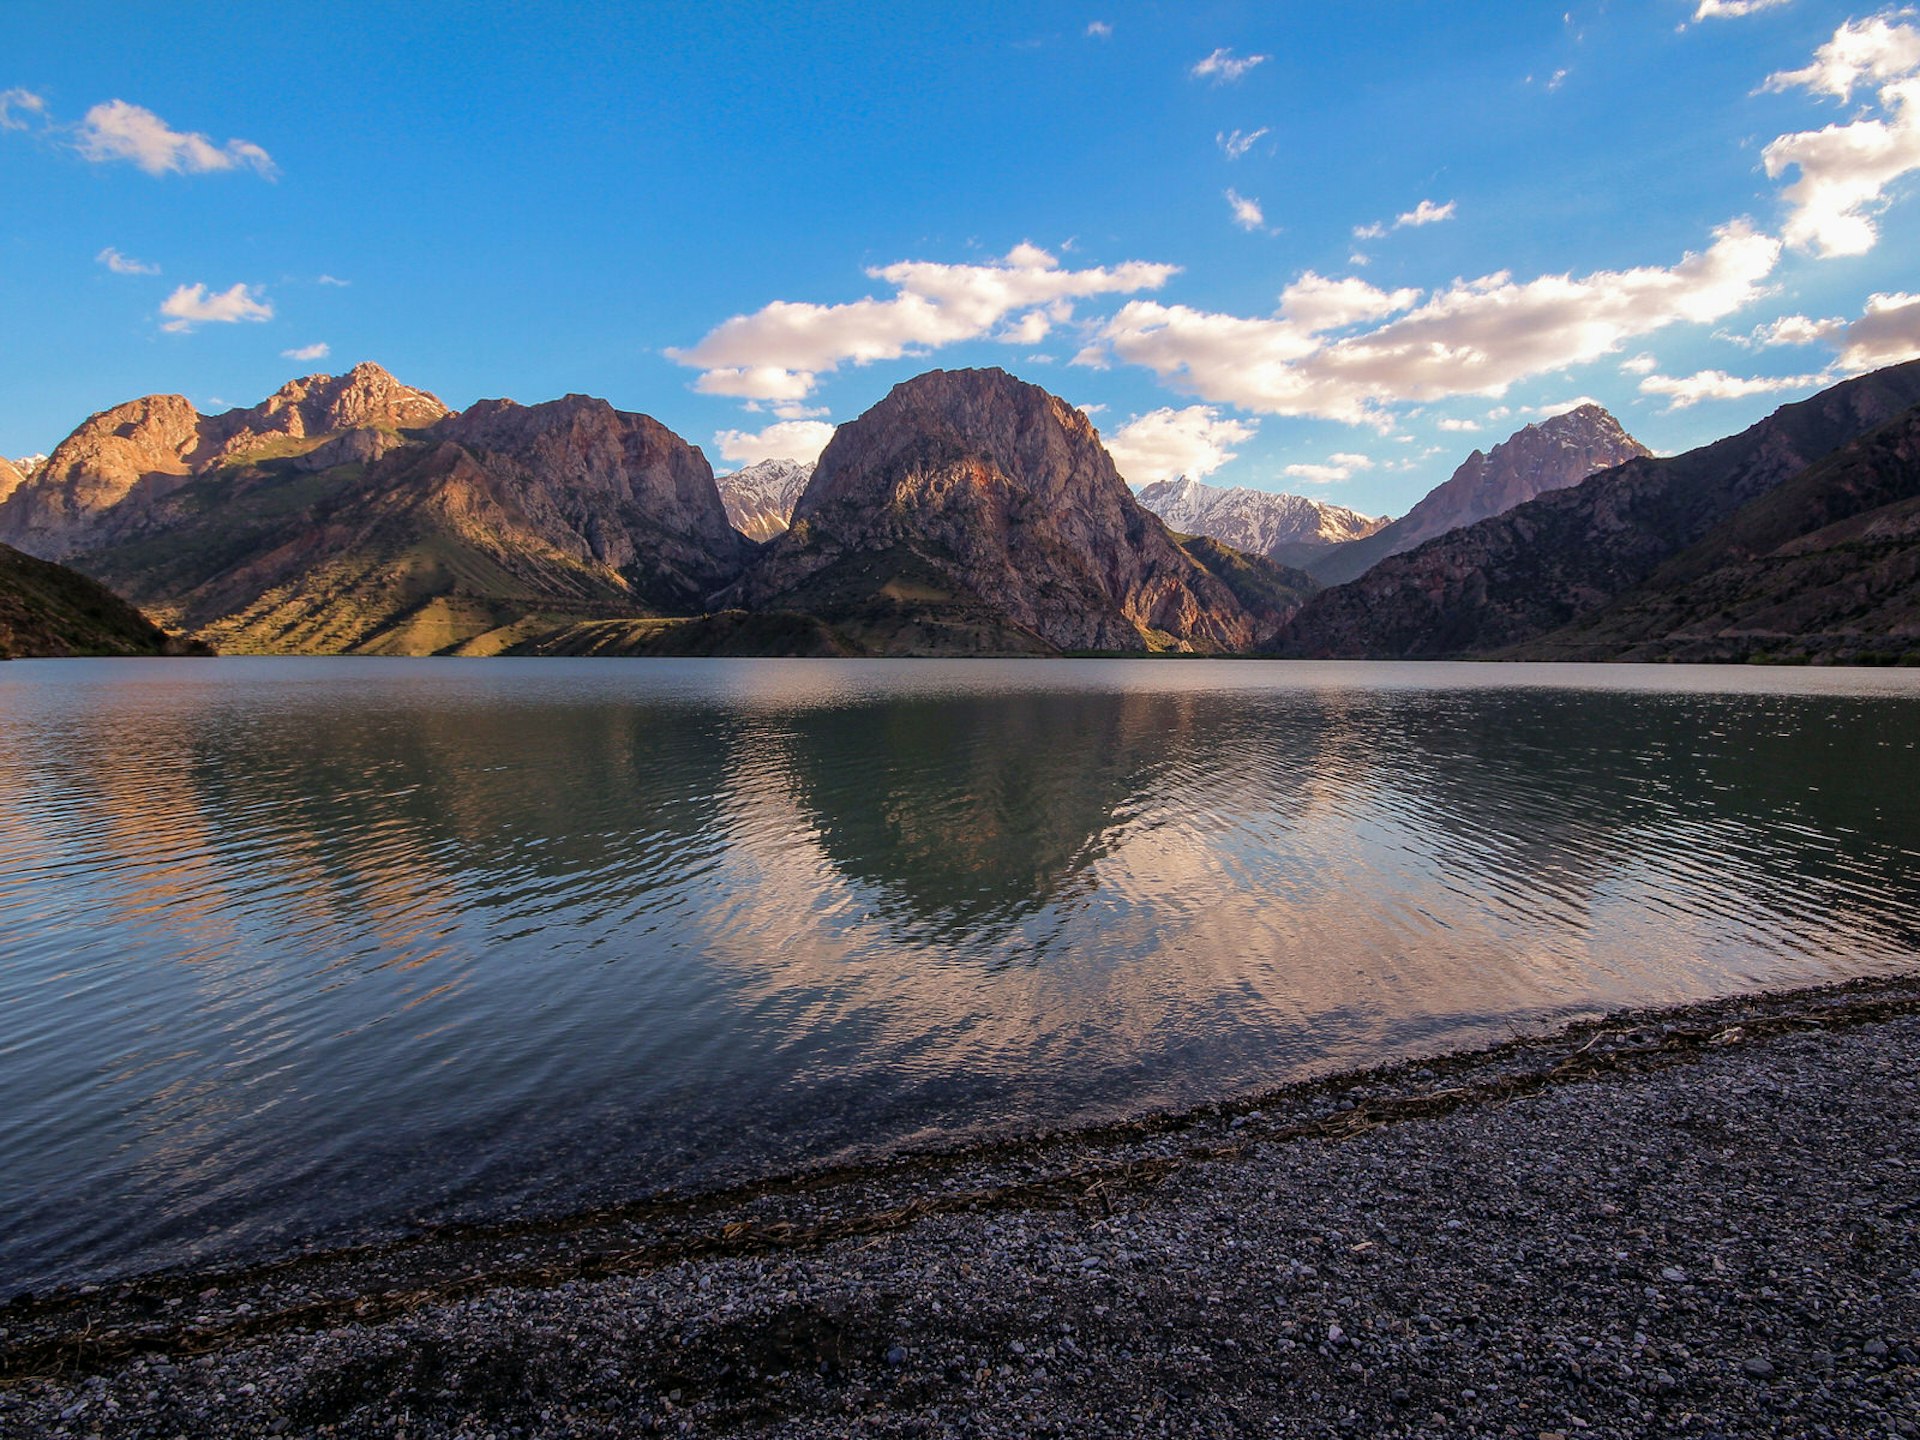 The shore of Iskander-Kul lake, with a pink sunset falling on the mountain peaks beyond © Stephen Lioy / Lonely Planet